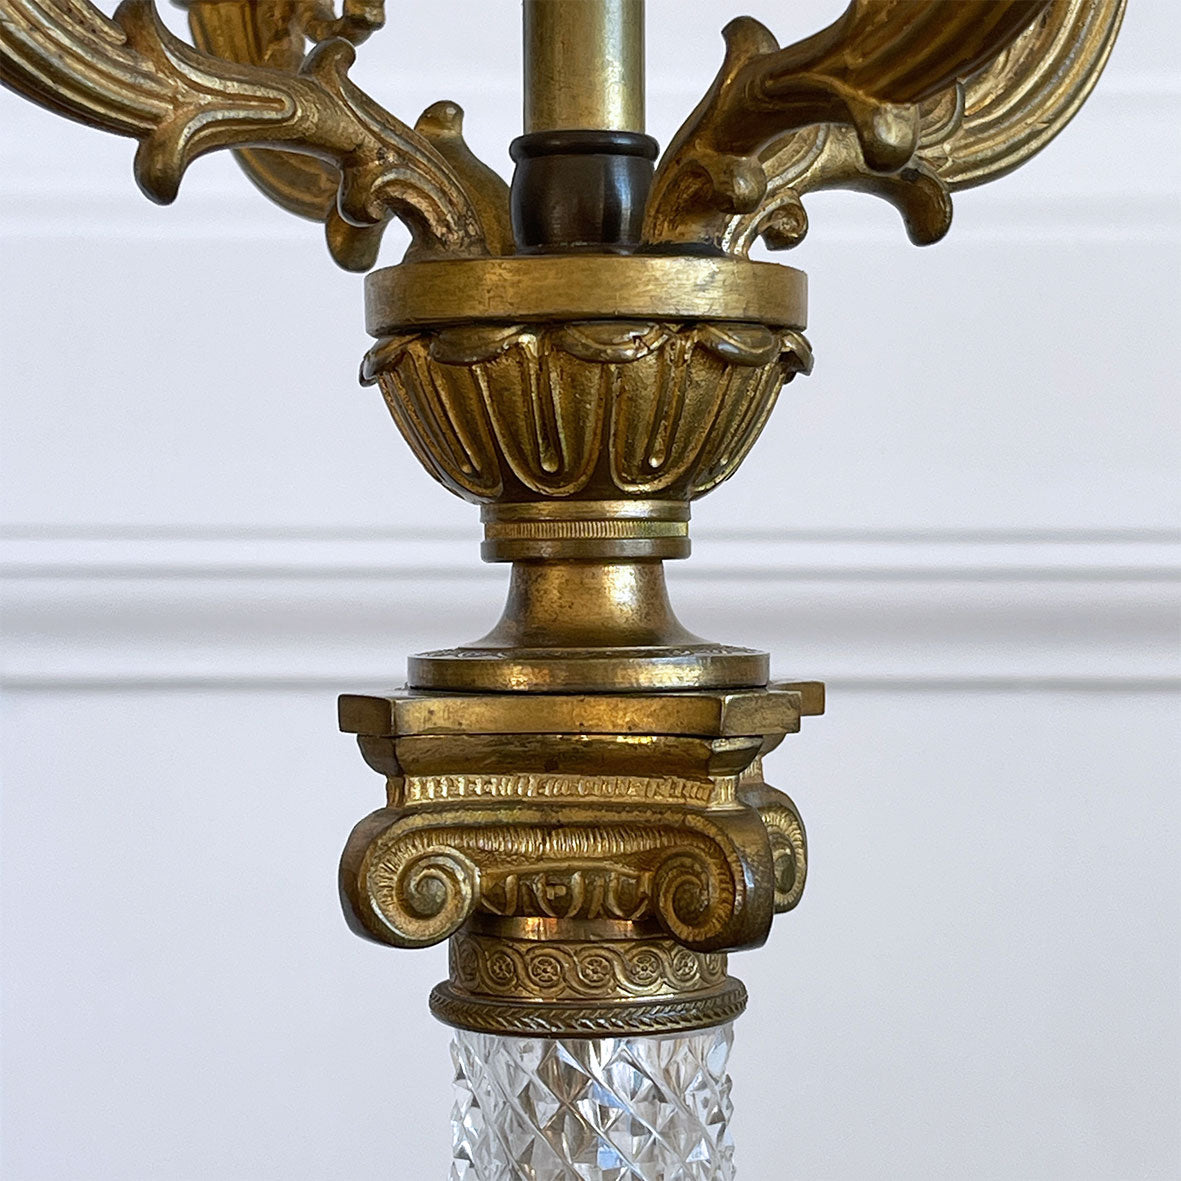 A converted four branch French classical crystal glass & gilt table candelabra with two pull chain switched down light fittings - SHOP NOW - www.intovintage.co.uk